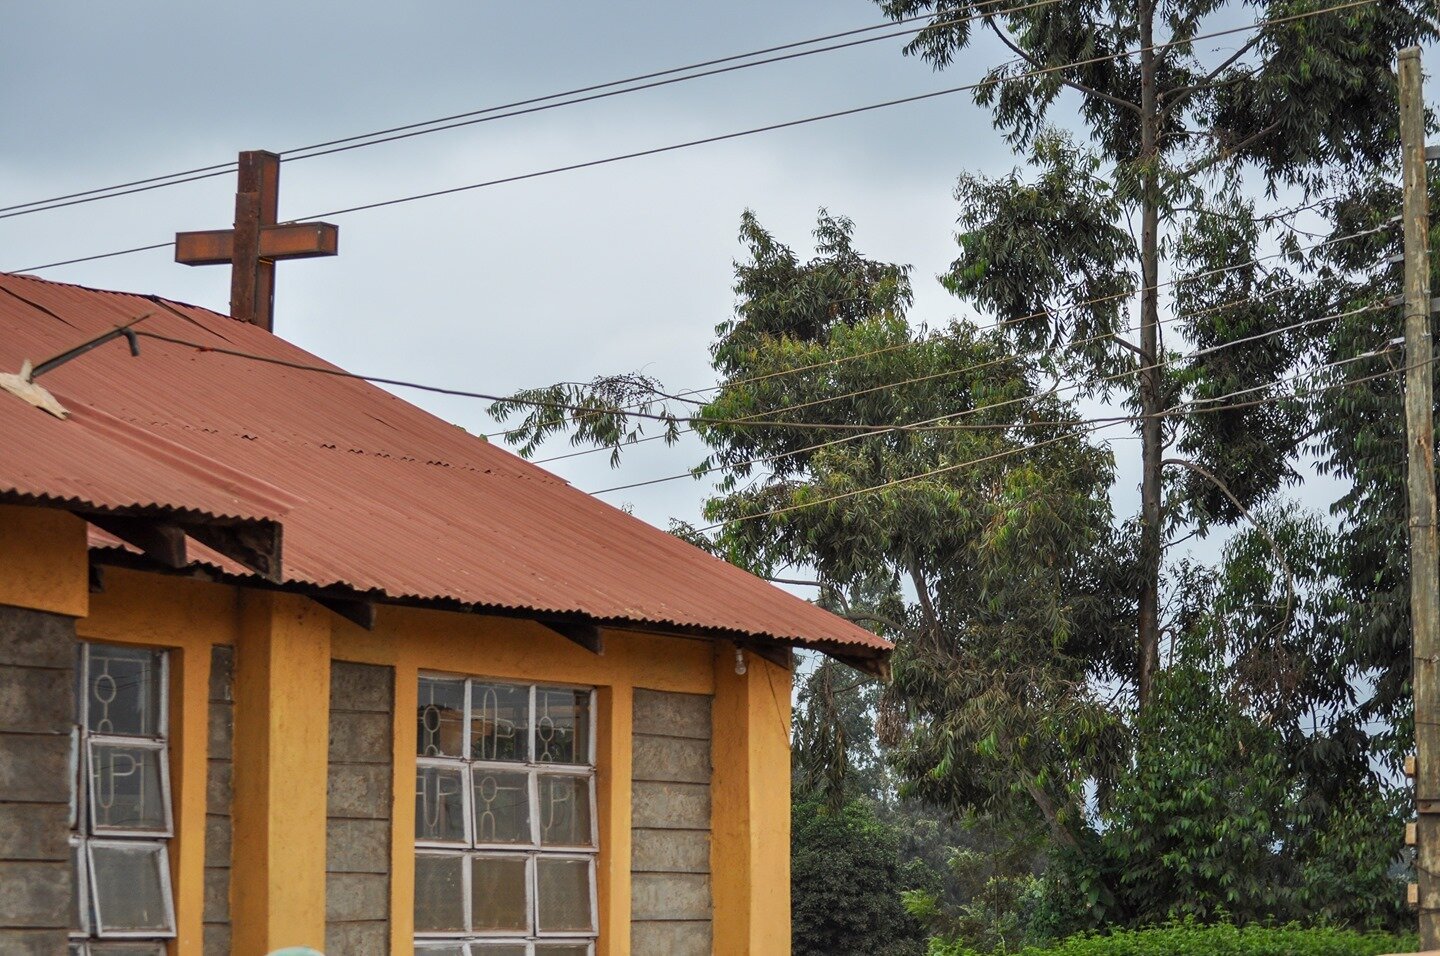 The CARE for AIDS center at Gachie, a community on the outskirts of Nairobi close to the Westlands neighborhood, where counselors Sarah and John have served since 2010.